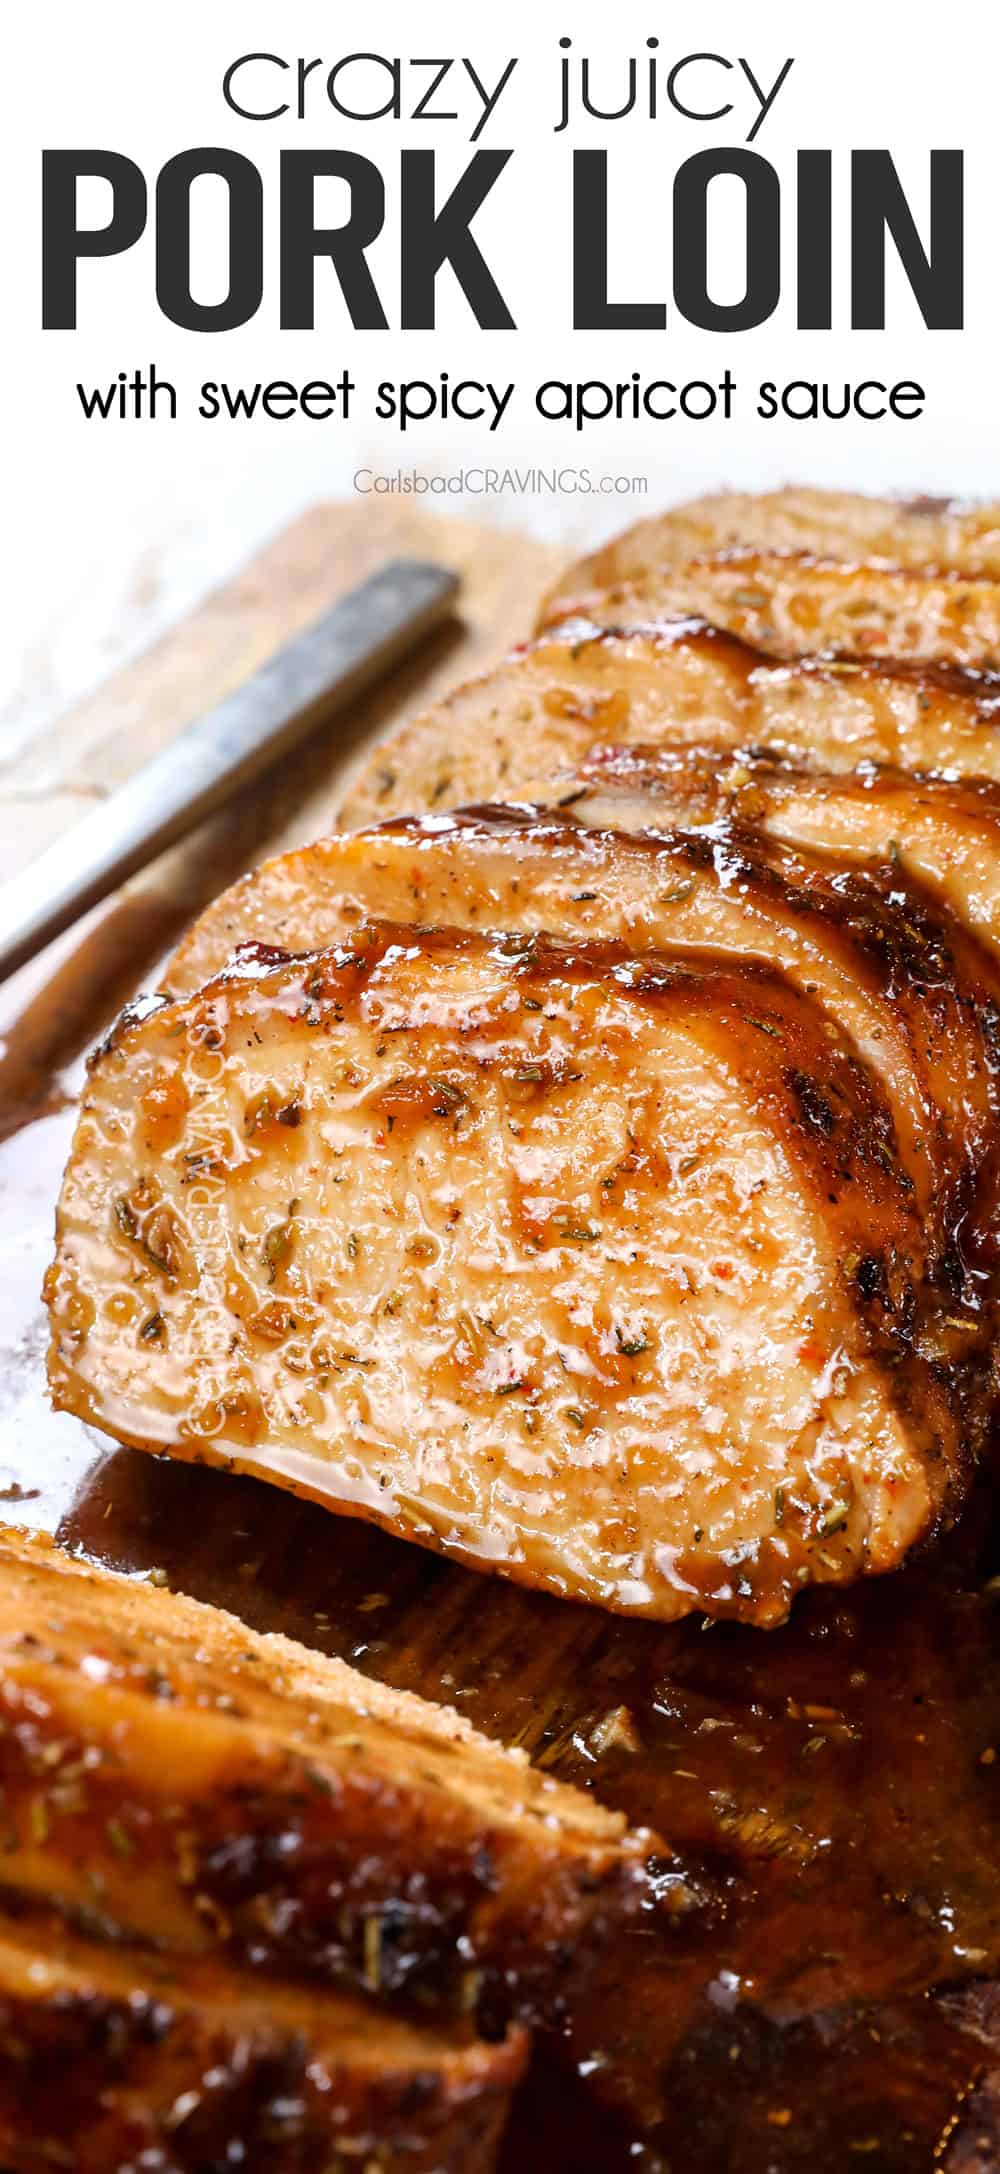 up close of sliced pork loin roast recipe showing how juicy and tender it is